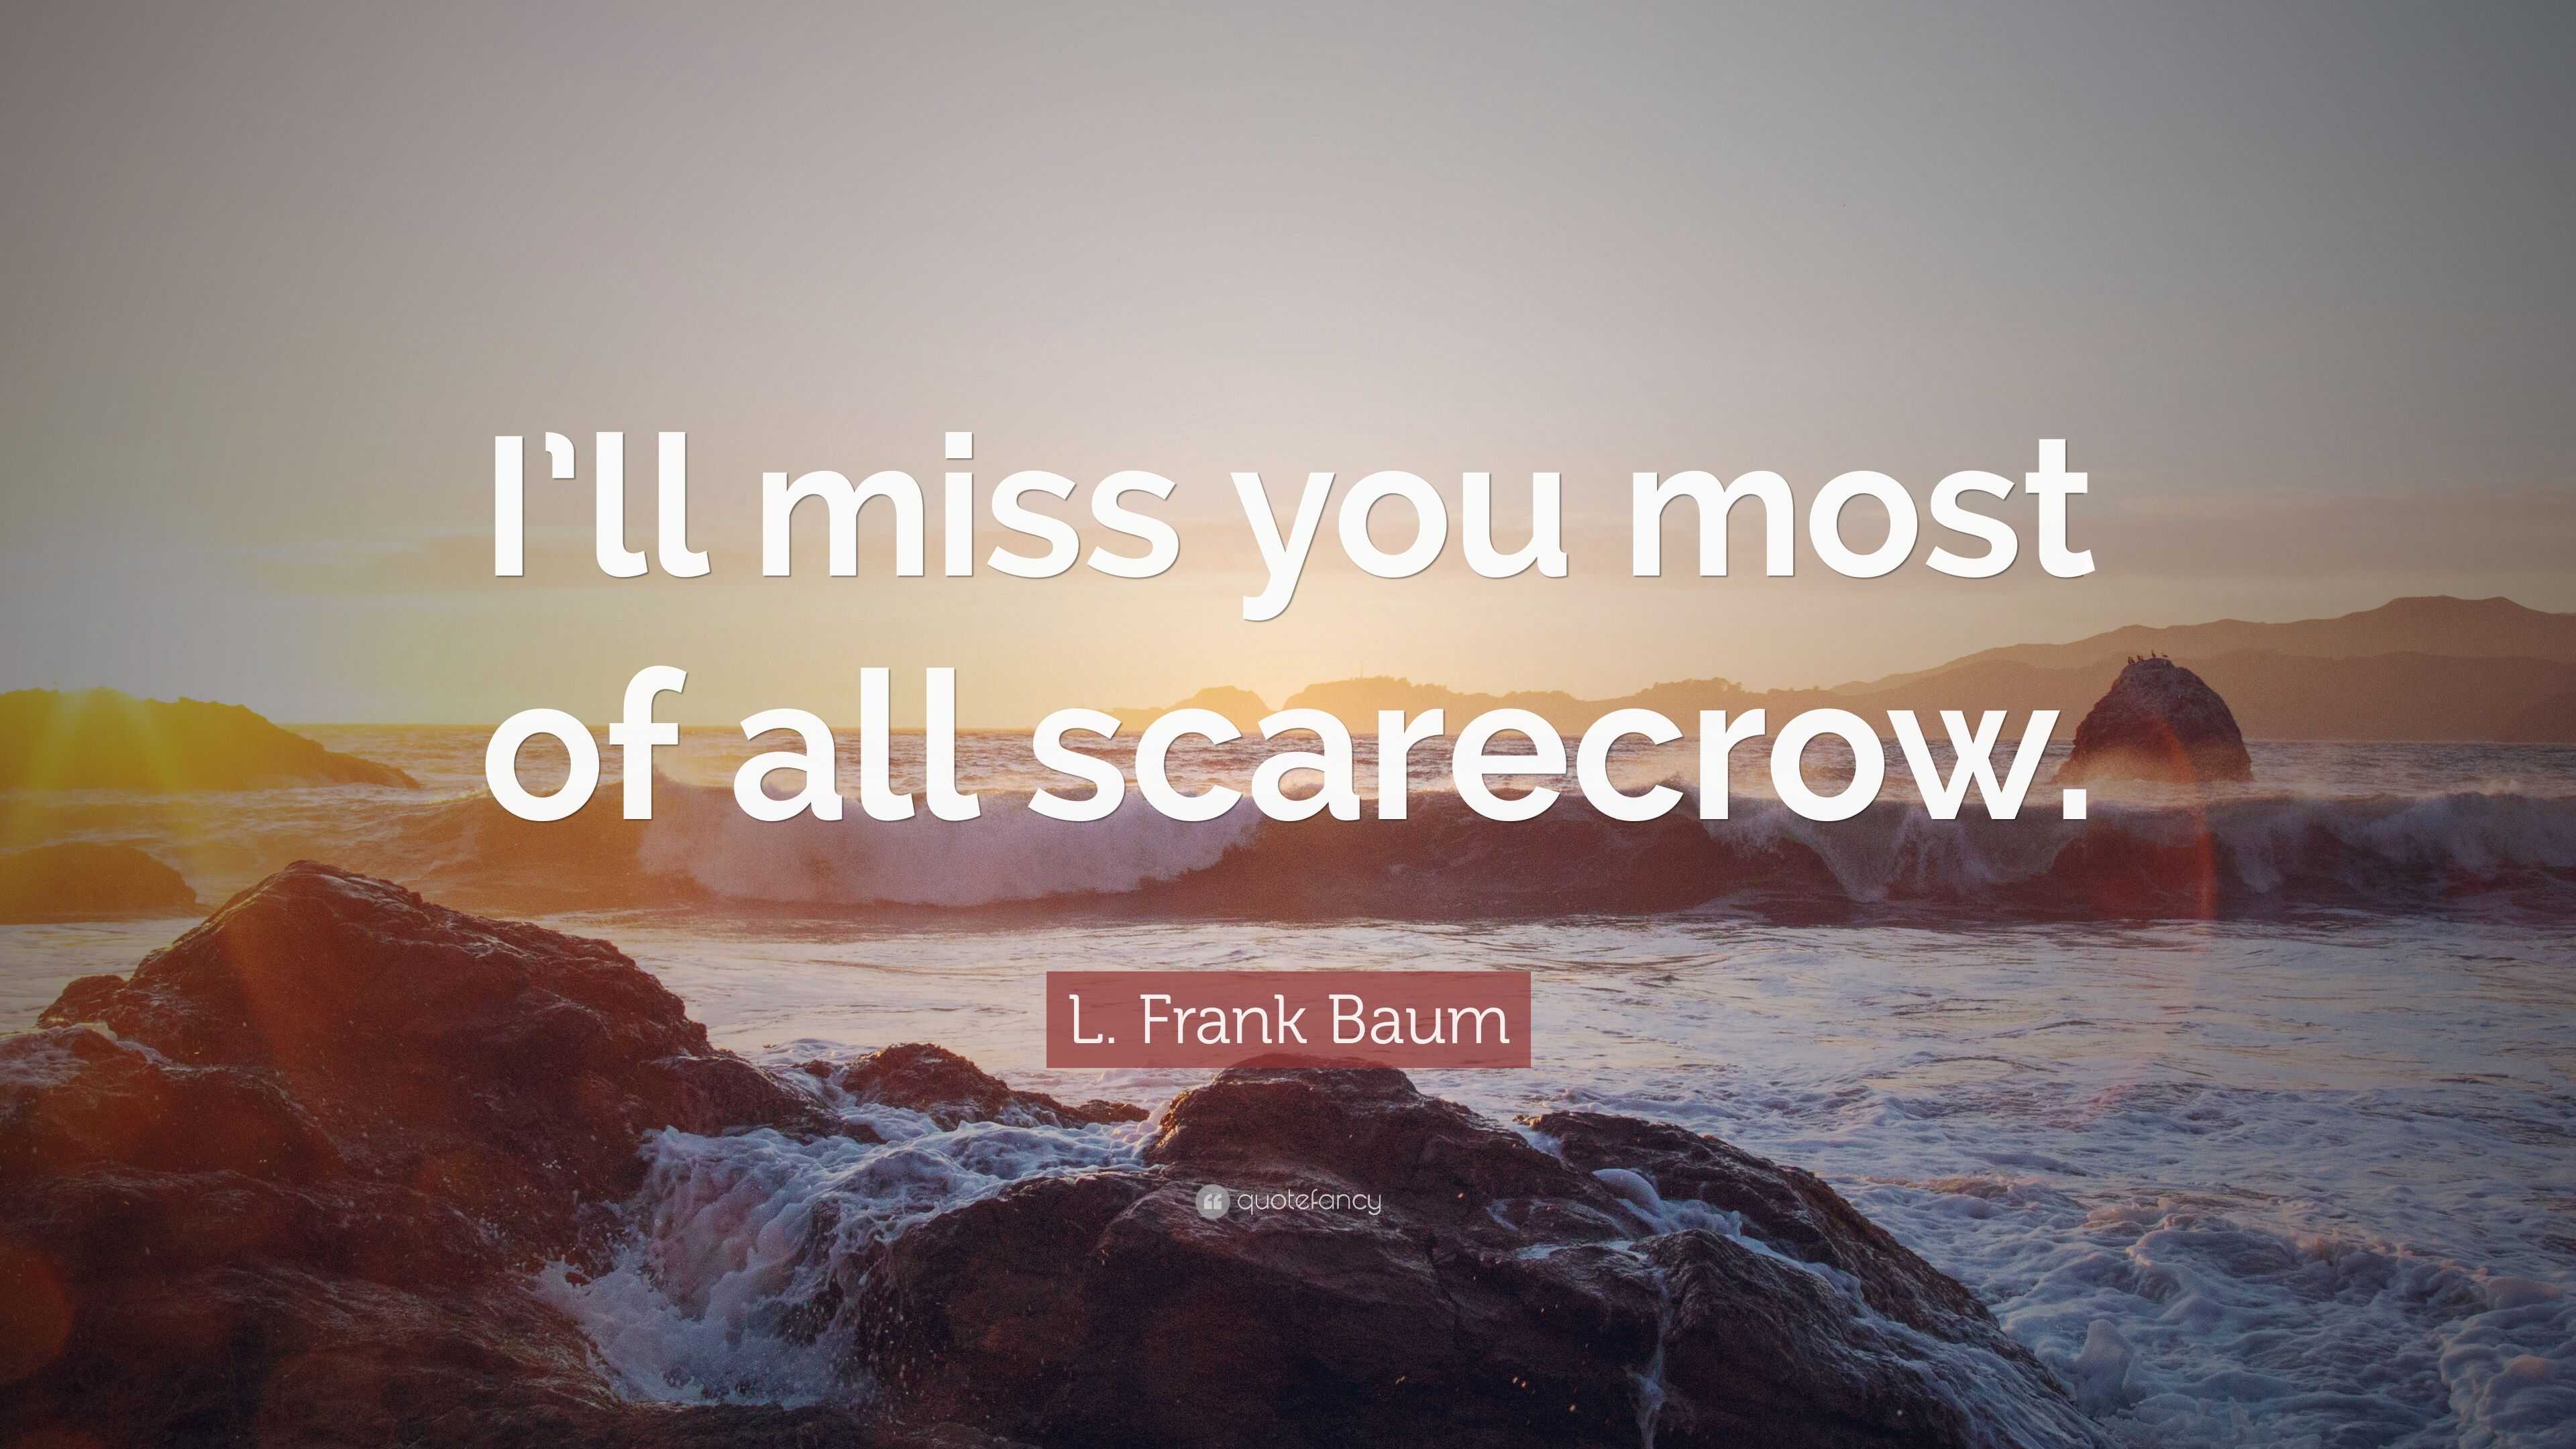 L. Frank Baum Quote: “I'll miss you most of all scarecrow.”